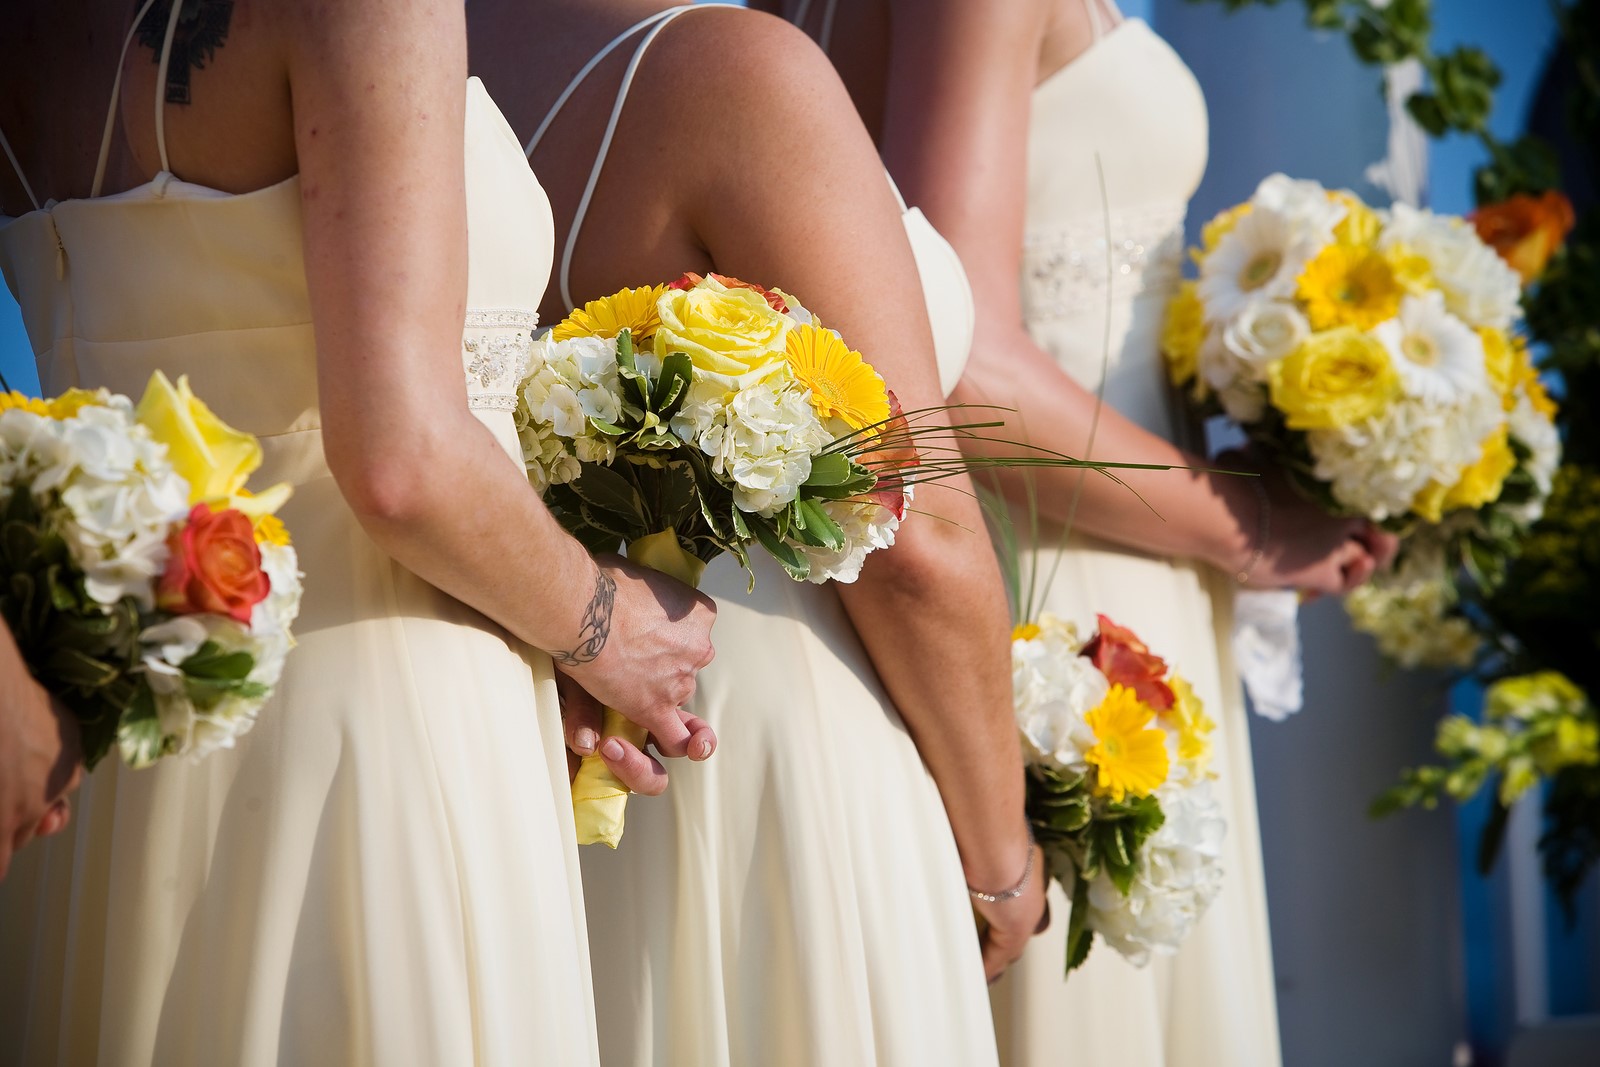 Style Guide: Dressing up Bridesmaids to Match the Bride